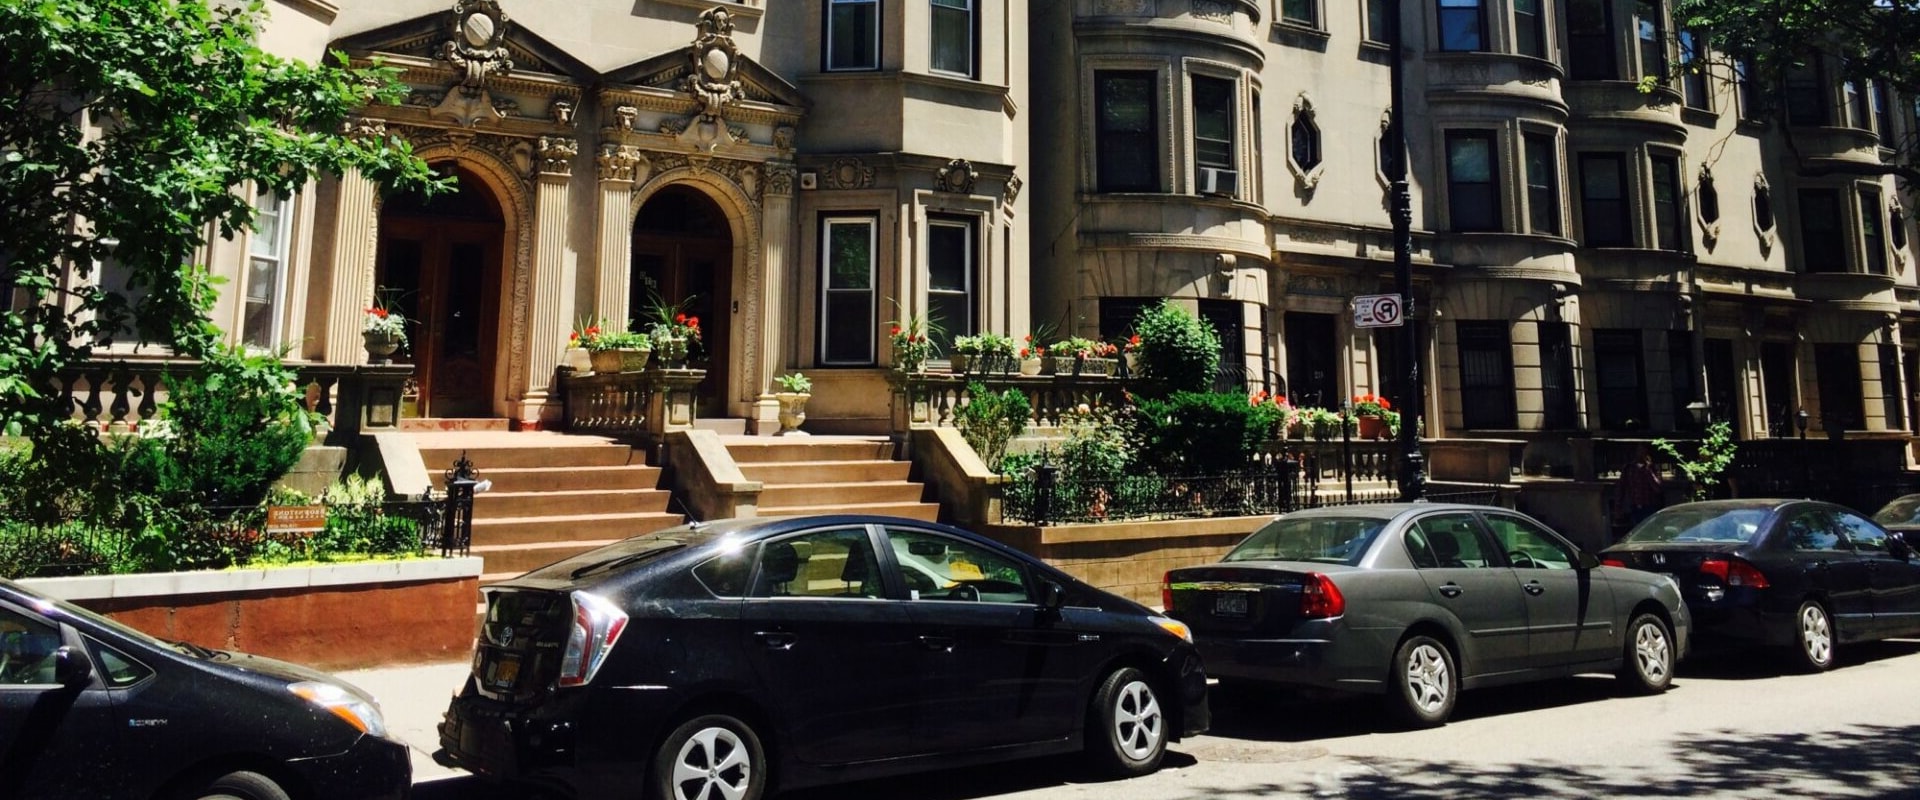 The Most Affordable Neighborhoods for Young Professionals in Brooklyn, NY